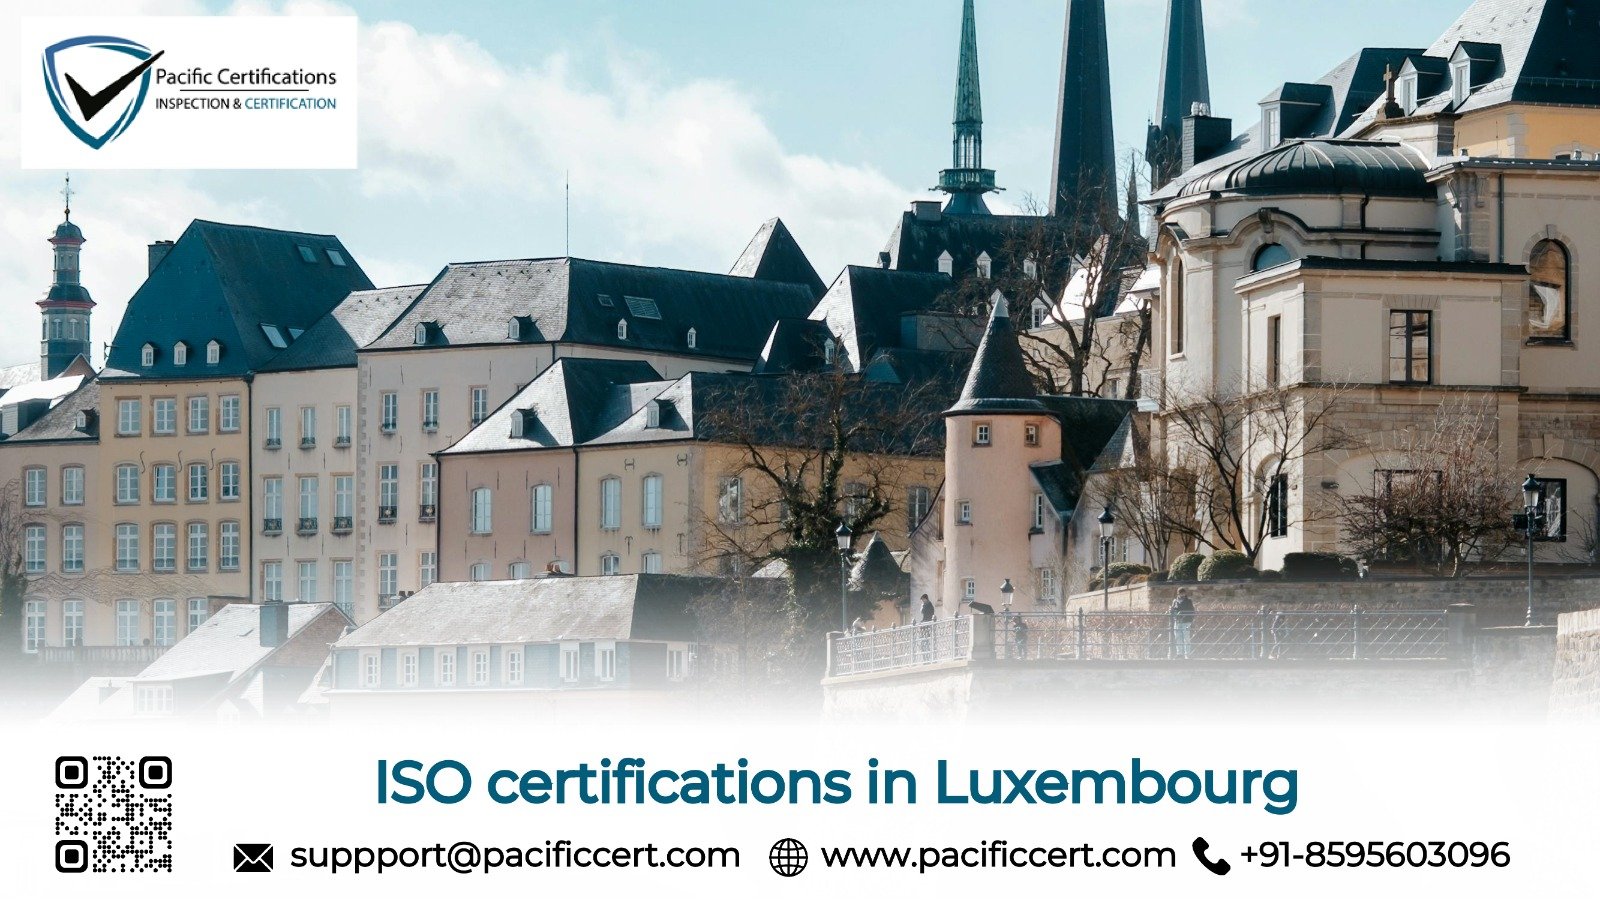 ISO Certifications in Luxembourg and How Pacific Certifications can help | Pacific Certifications